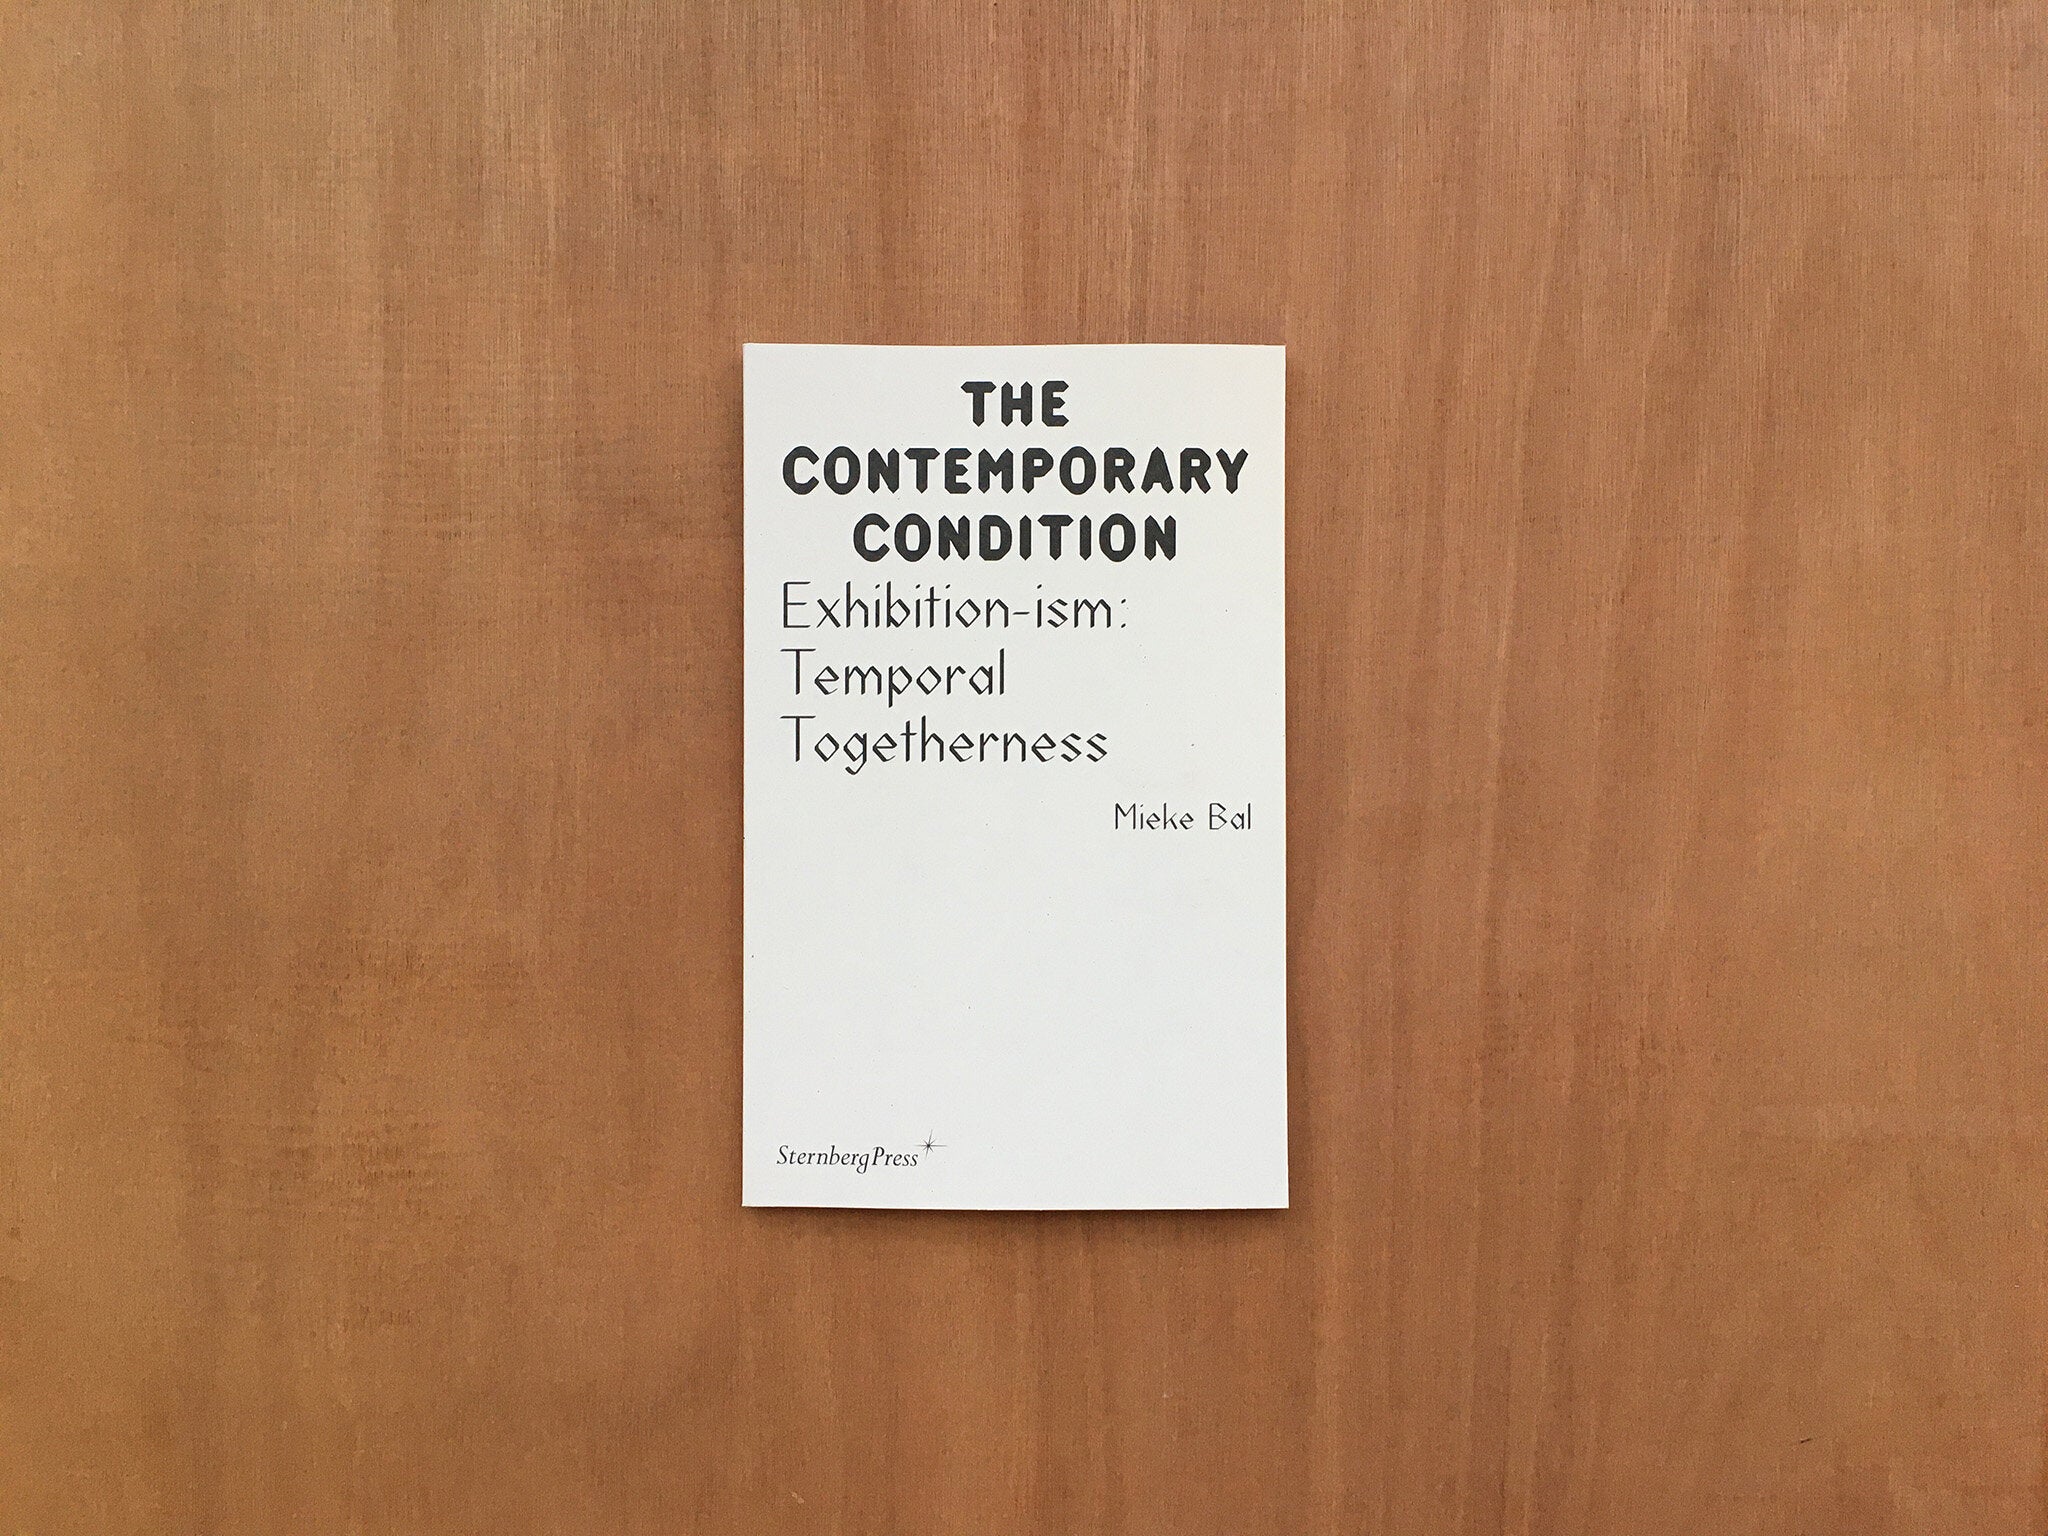 EXHIBITION-ISM: TEMPORAL TOGETHERNESS by Mieke Bal